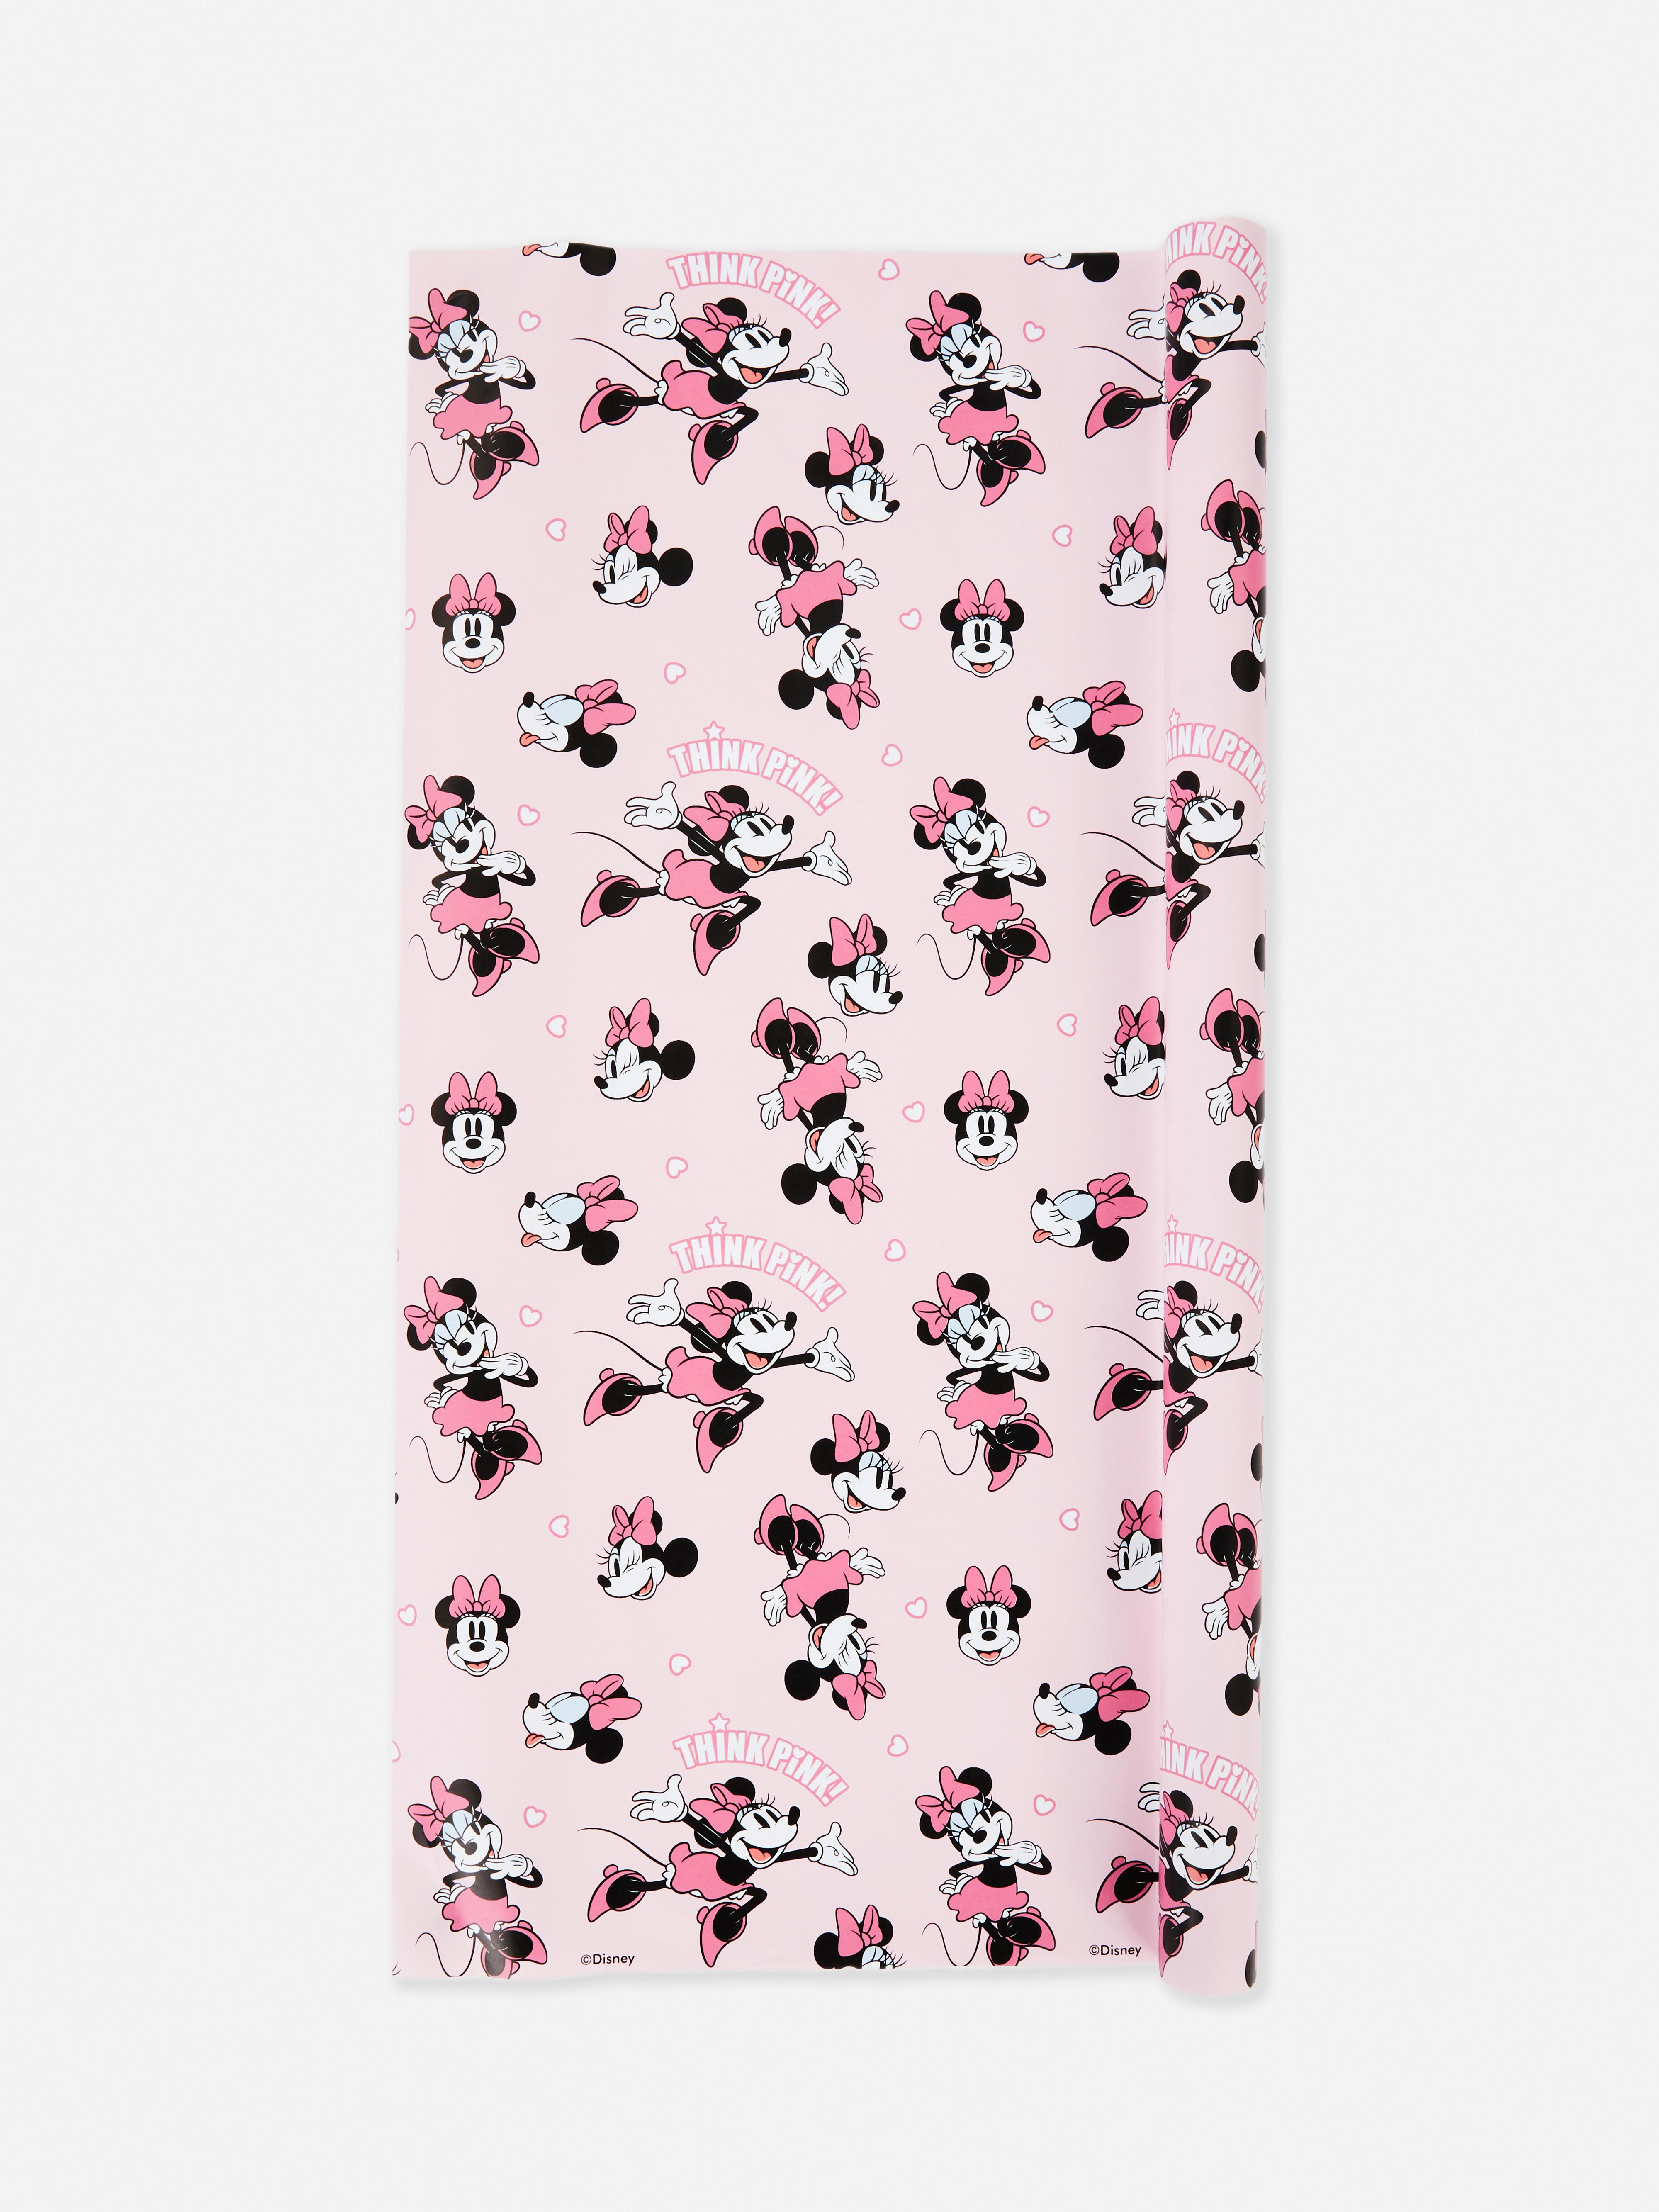 5M Disney's Minnie Mouse Wrapping Paper